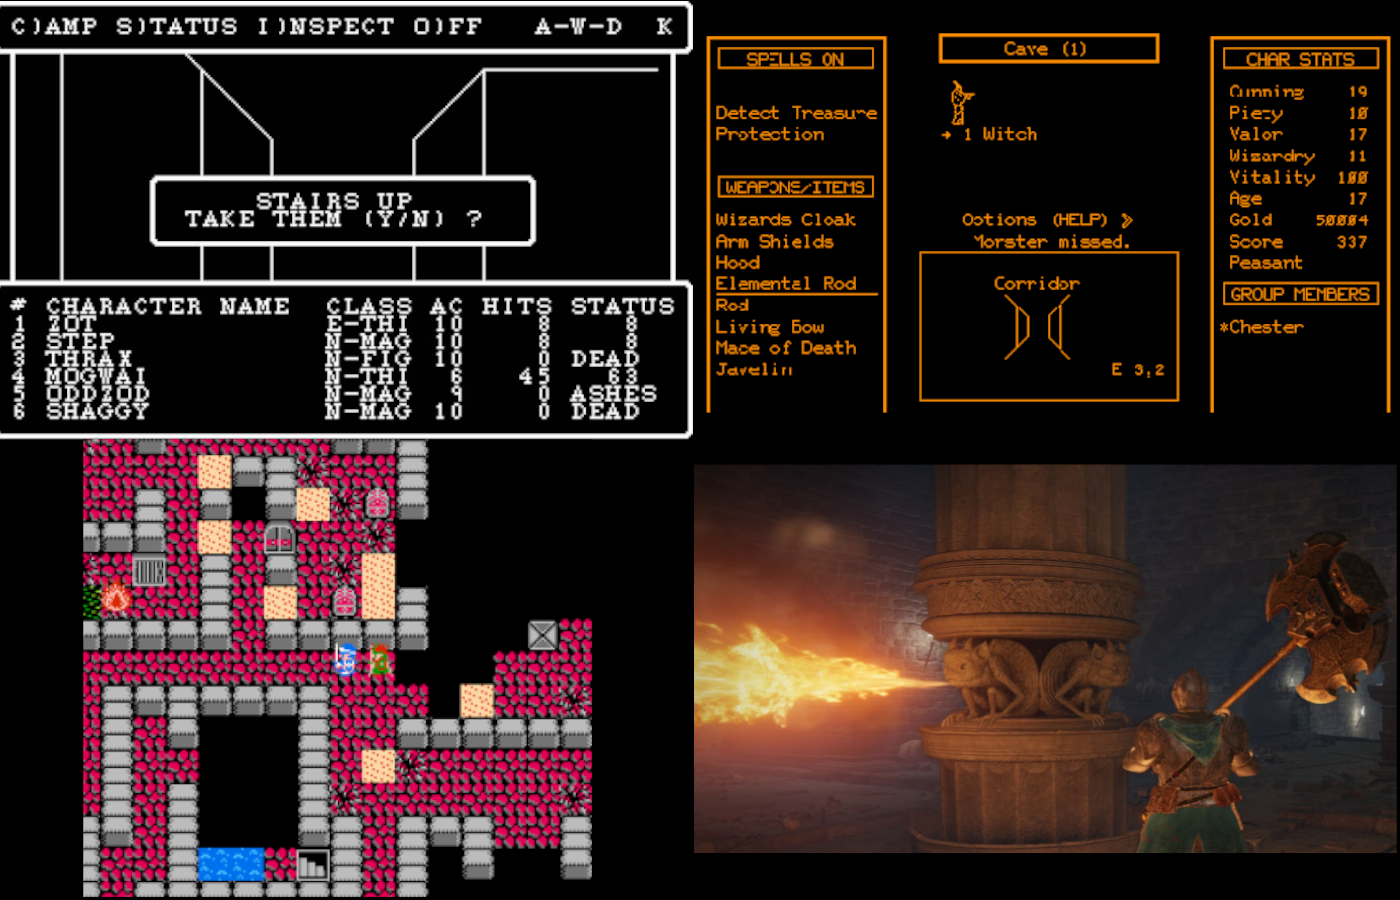 Clockwise from top left: two screenshots from monochromatic dungeon crawl games; a screenshot from Elden Ring with a knight facing a flamethrower trap; and an 8-bit screenshot of two characters exploring a mazelike dungeon.